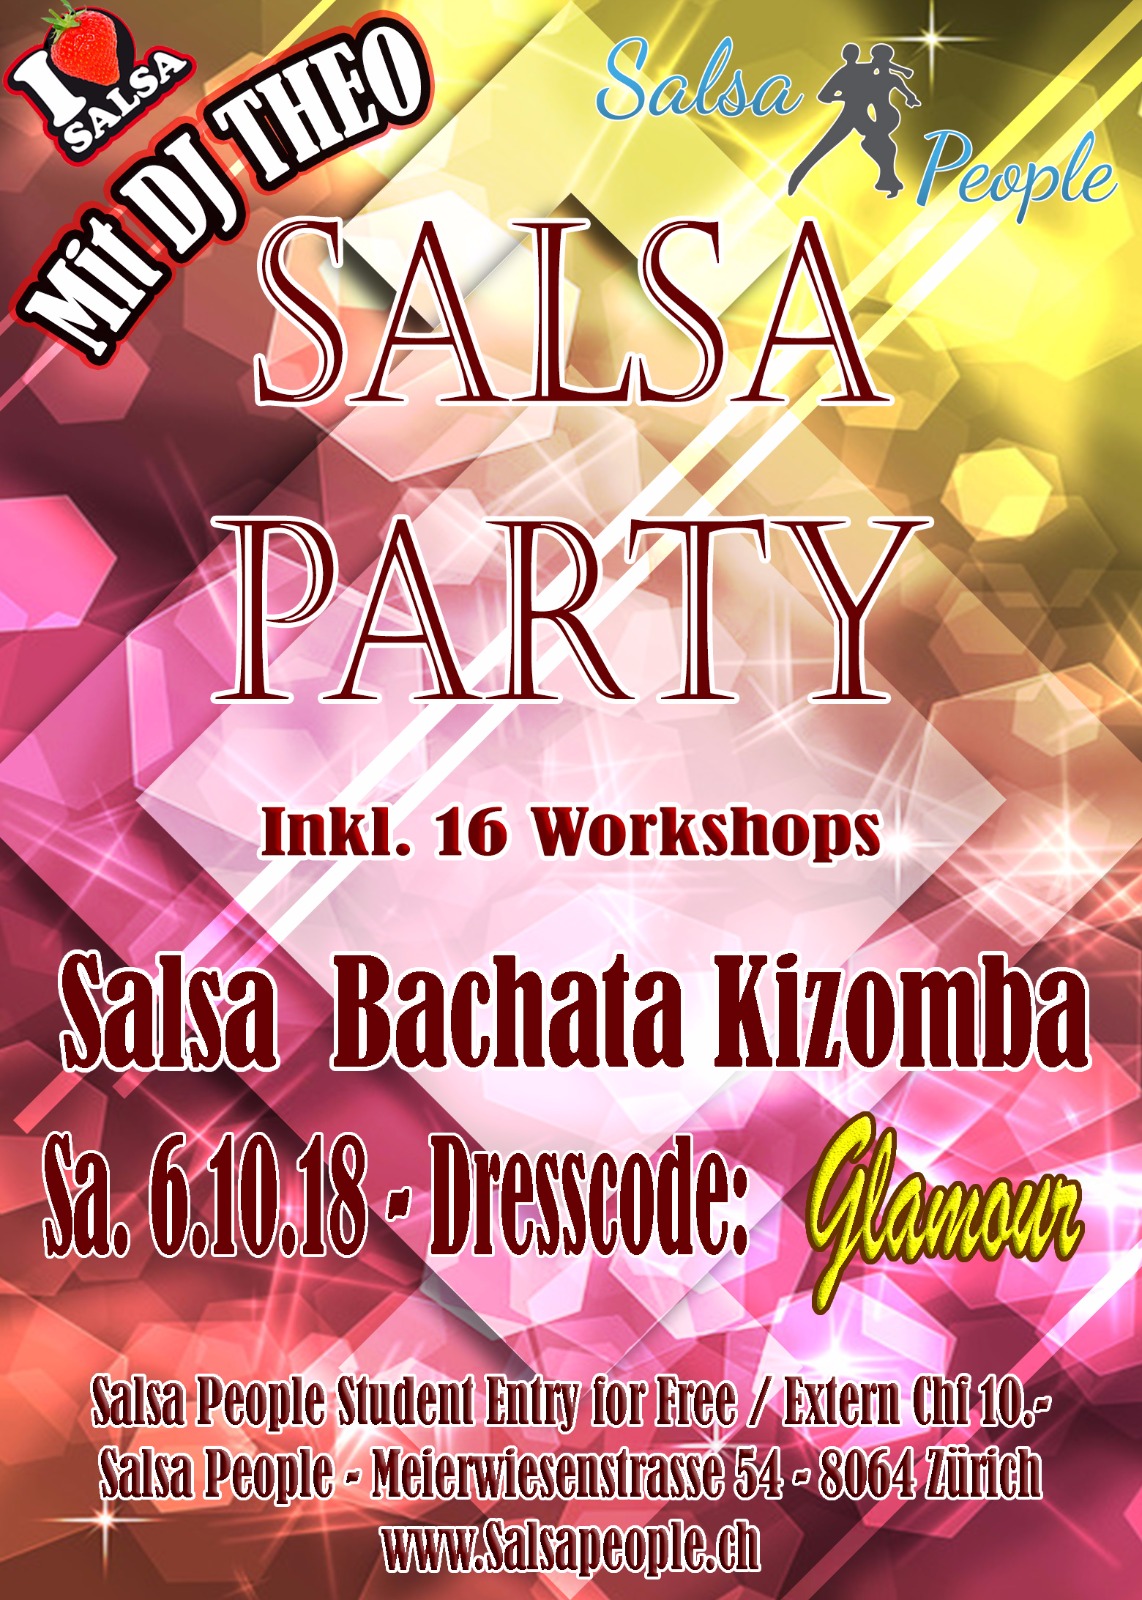 FREE WORKSHOP & PARTY BY SALSA PEOPLE